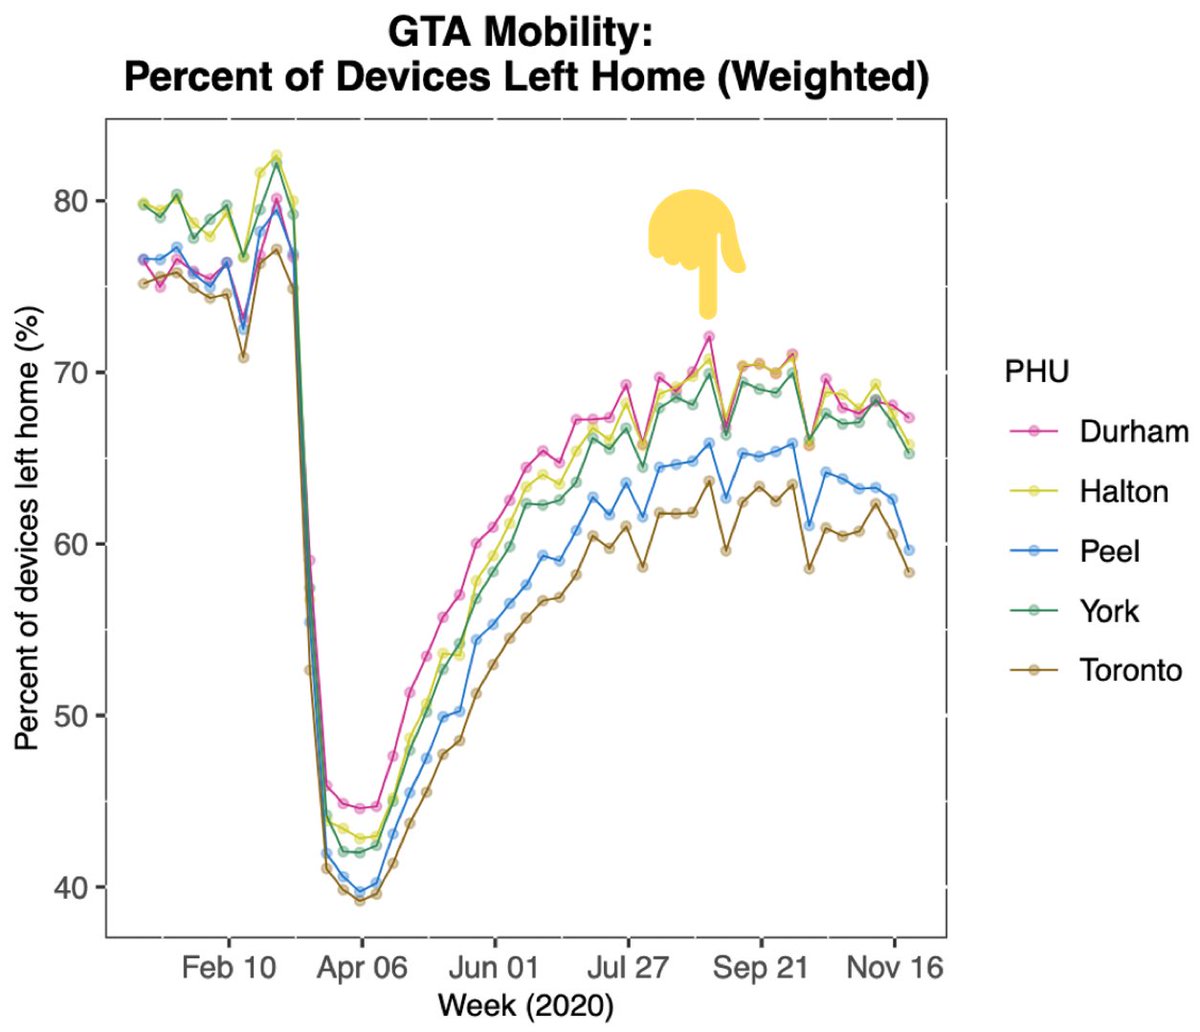 People’s mobility peaked around end of August/early September & then started a gradual downwards trend. Was there any effect of this gradual decline in mobility on the number of cases in Ontario? #COVID19  #Coronavirus  #lockdown  #pandemic  #science  #data  #Canada  #cdnpoli  #onpoli